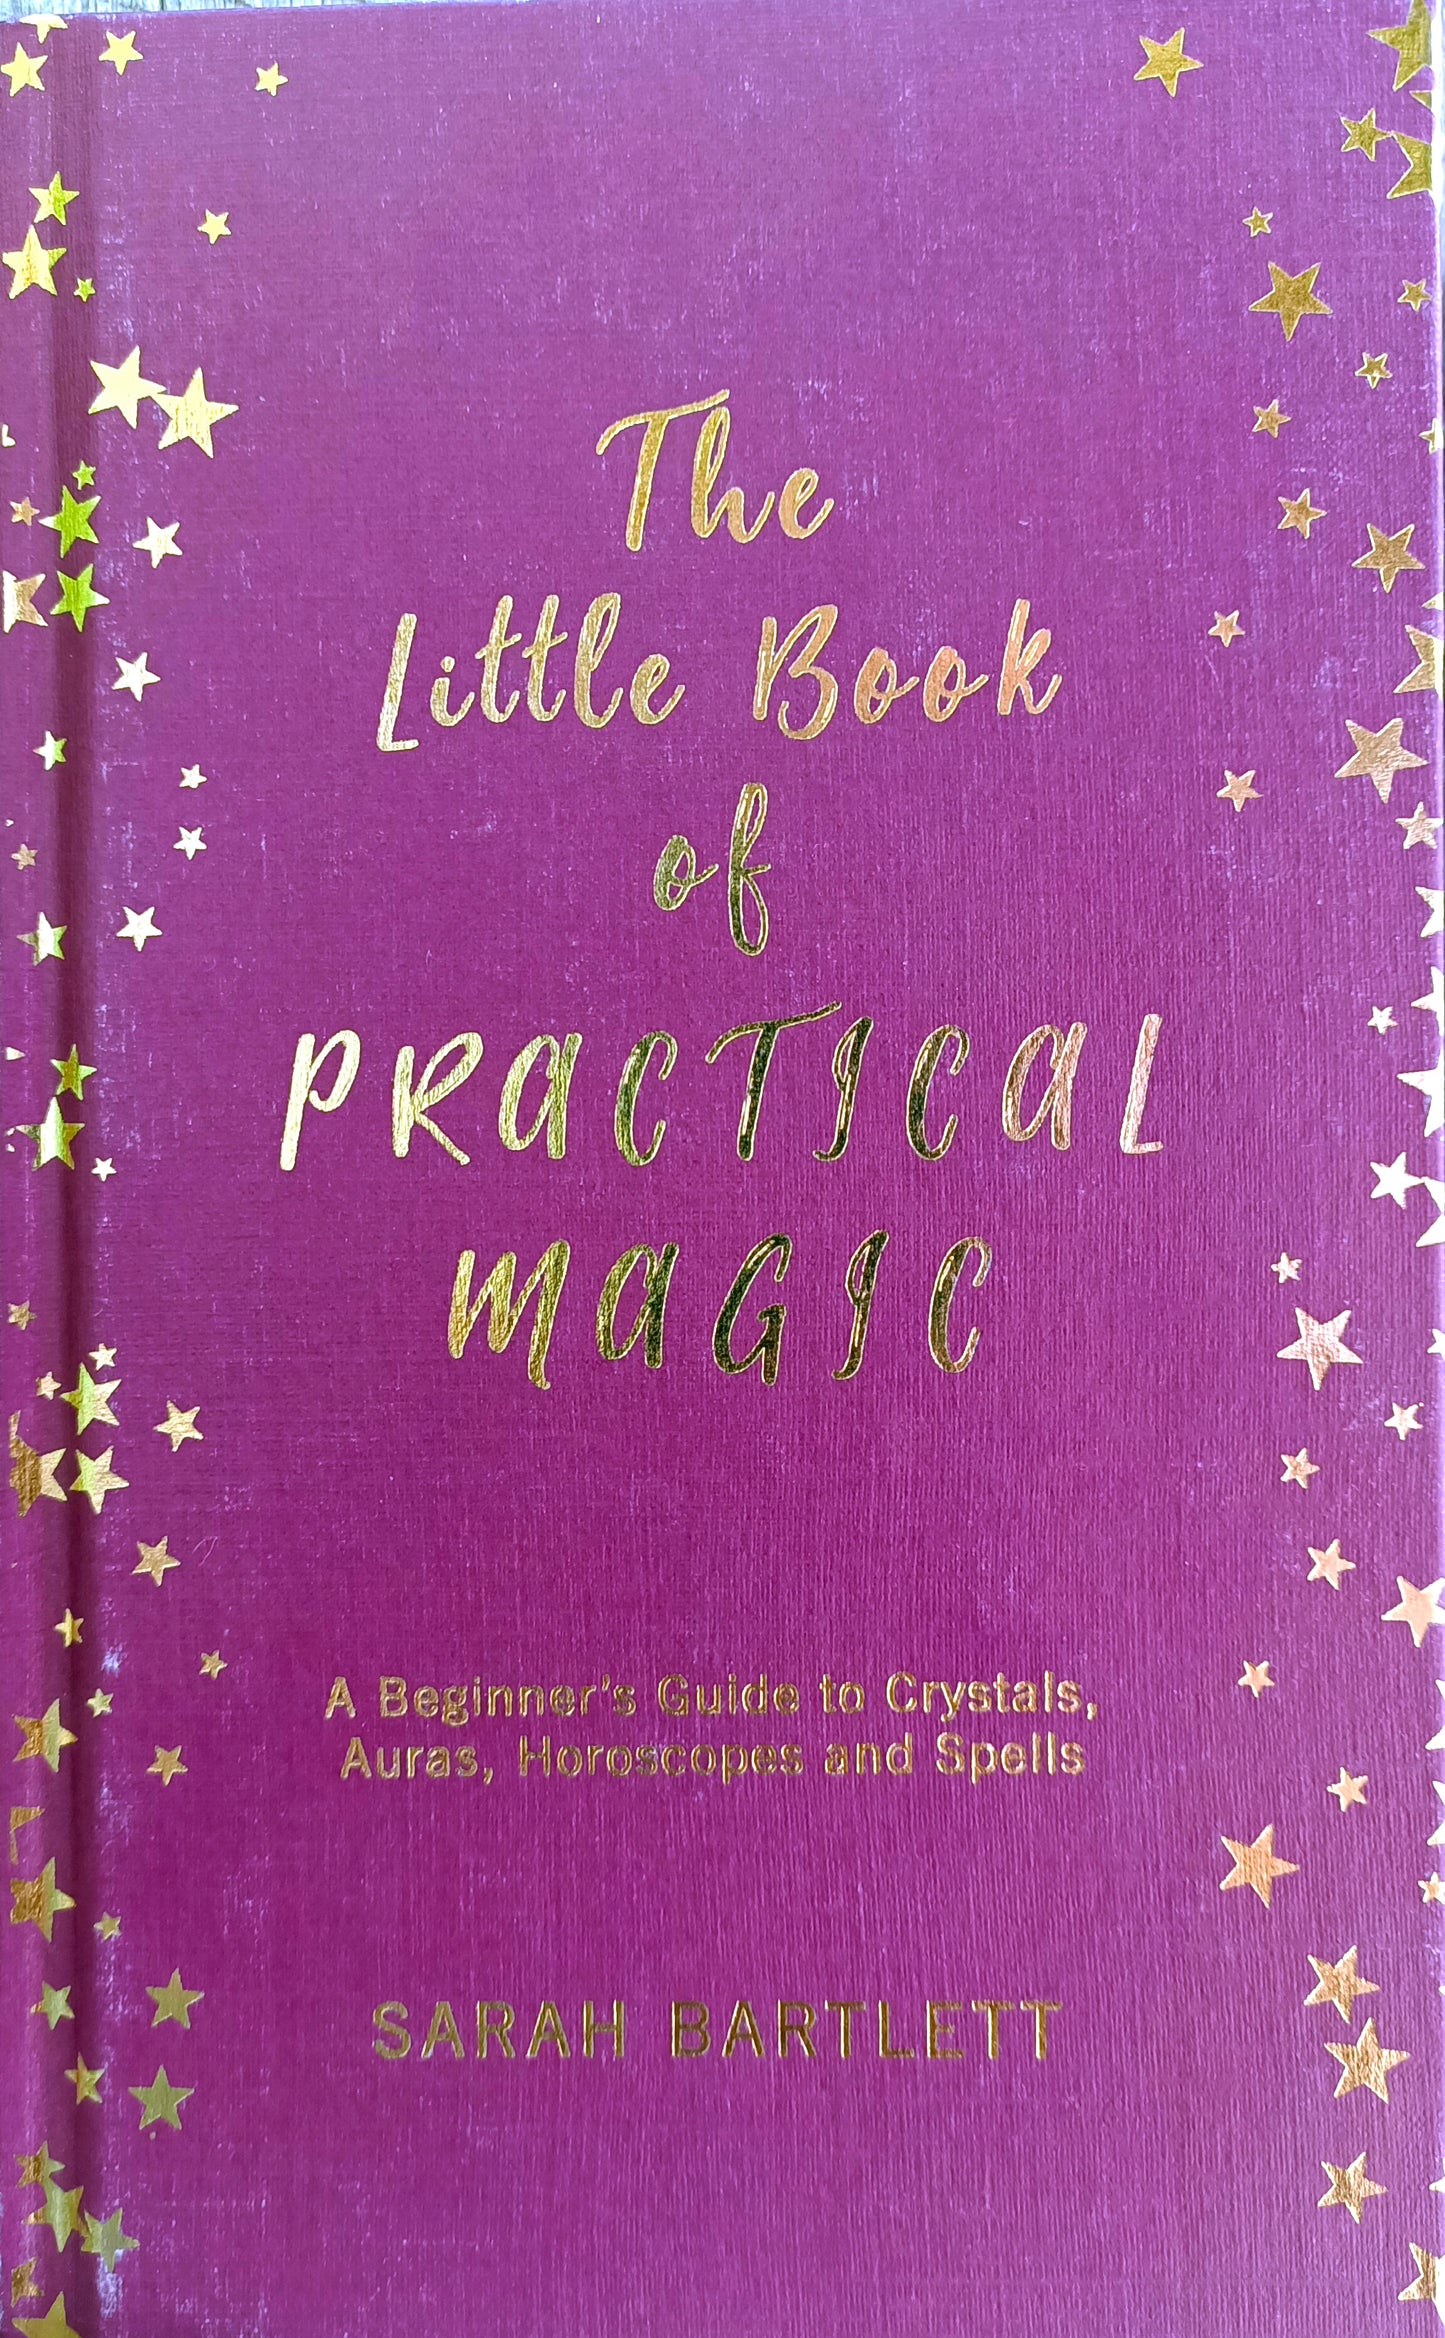 The Little Book of Practical Magic Beginner's Guide to Crystals, Auras, Horoscopes and Spells